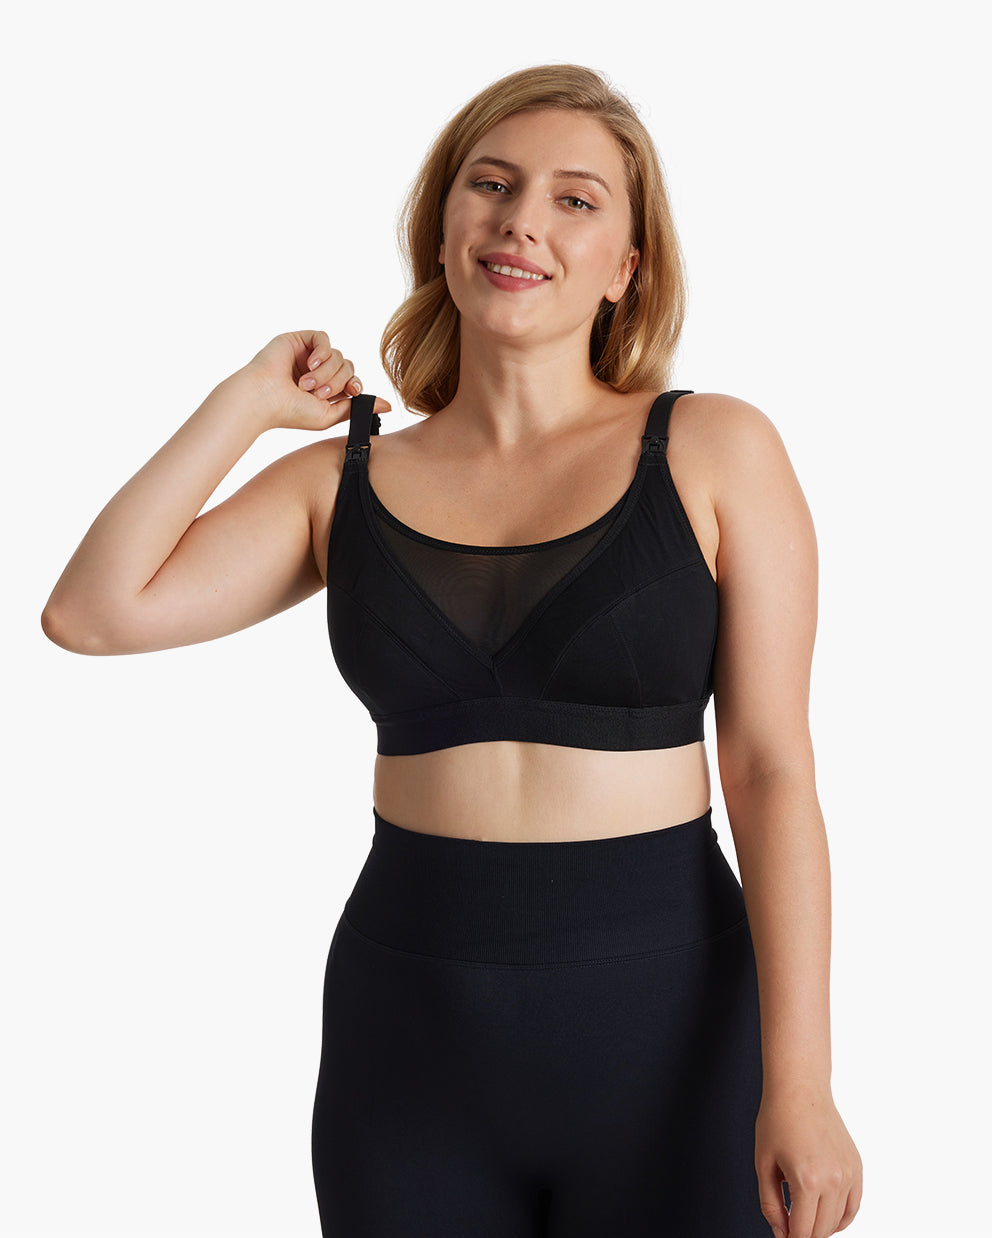 Woman wearing the Momcozy Bamboo Ultra-Soft & Cool Breeze Pumping & Nursing Bra (HF018) in black, showcasing the comfortable and supportive design for pumping and nursing mothers.